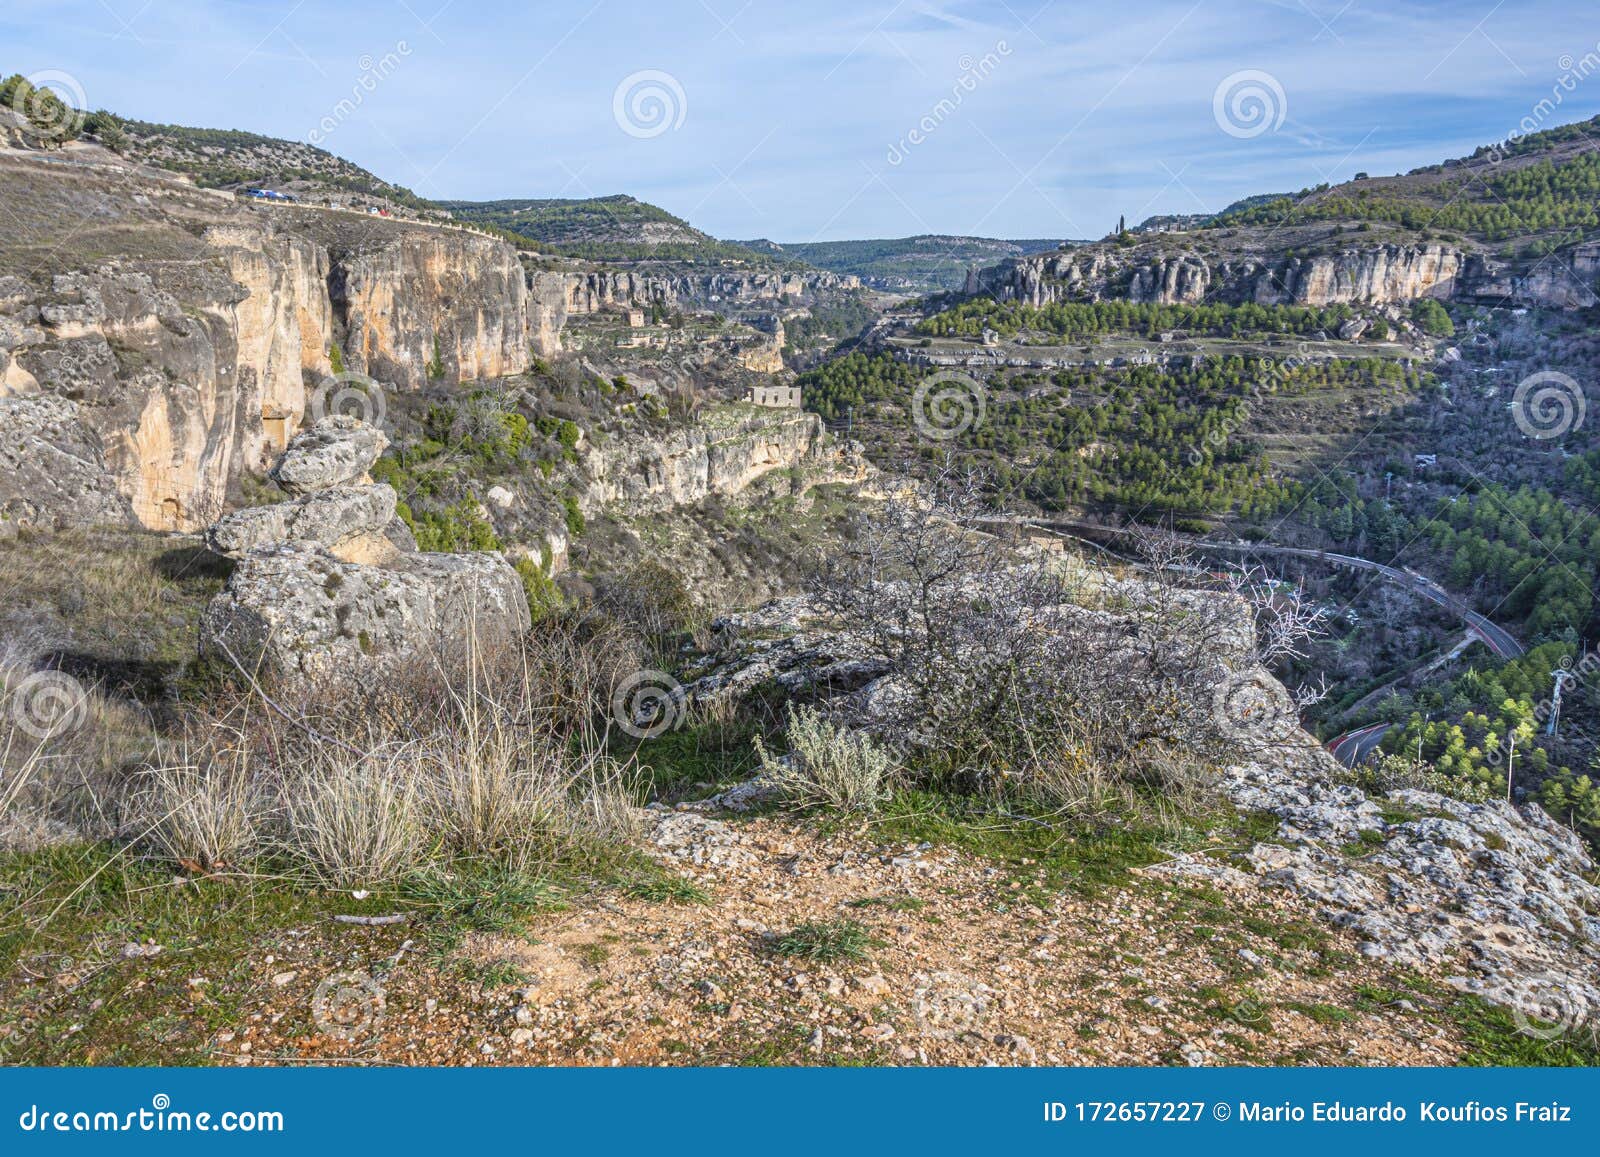 rock formations in the huecar river canyon. basin. spain. europe